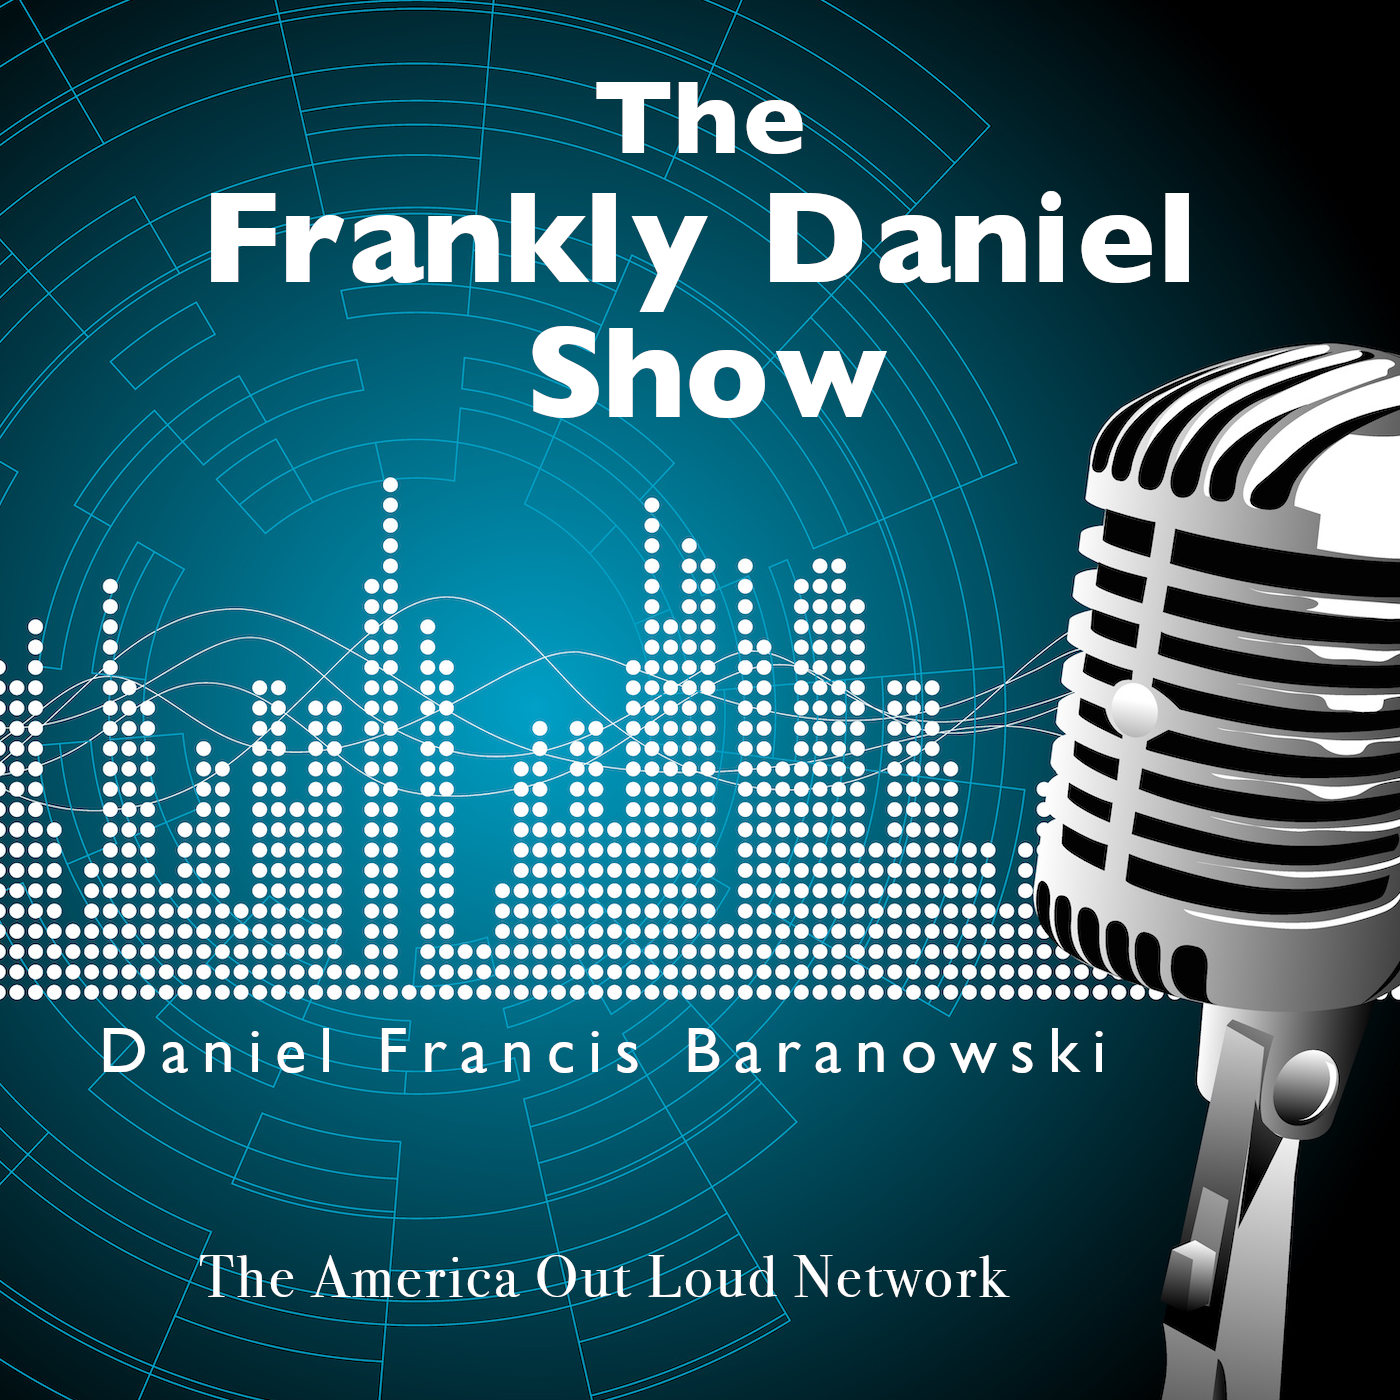 THE FRANKLY DANIEL SHOW